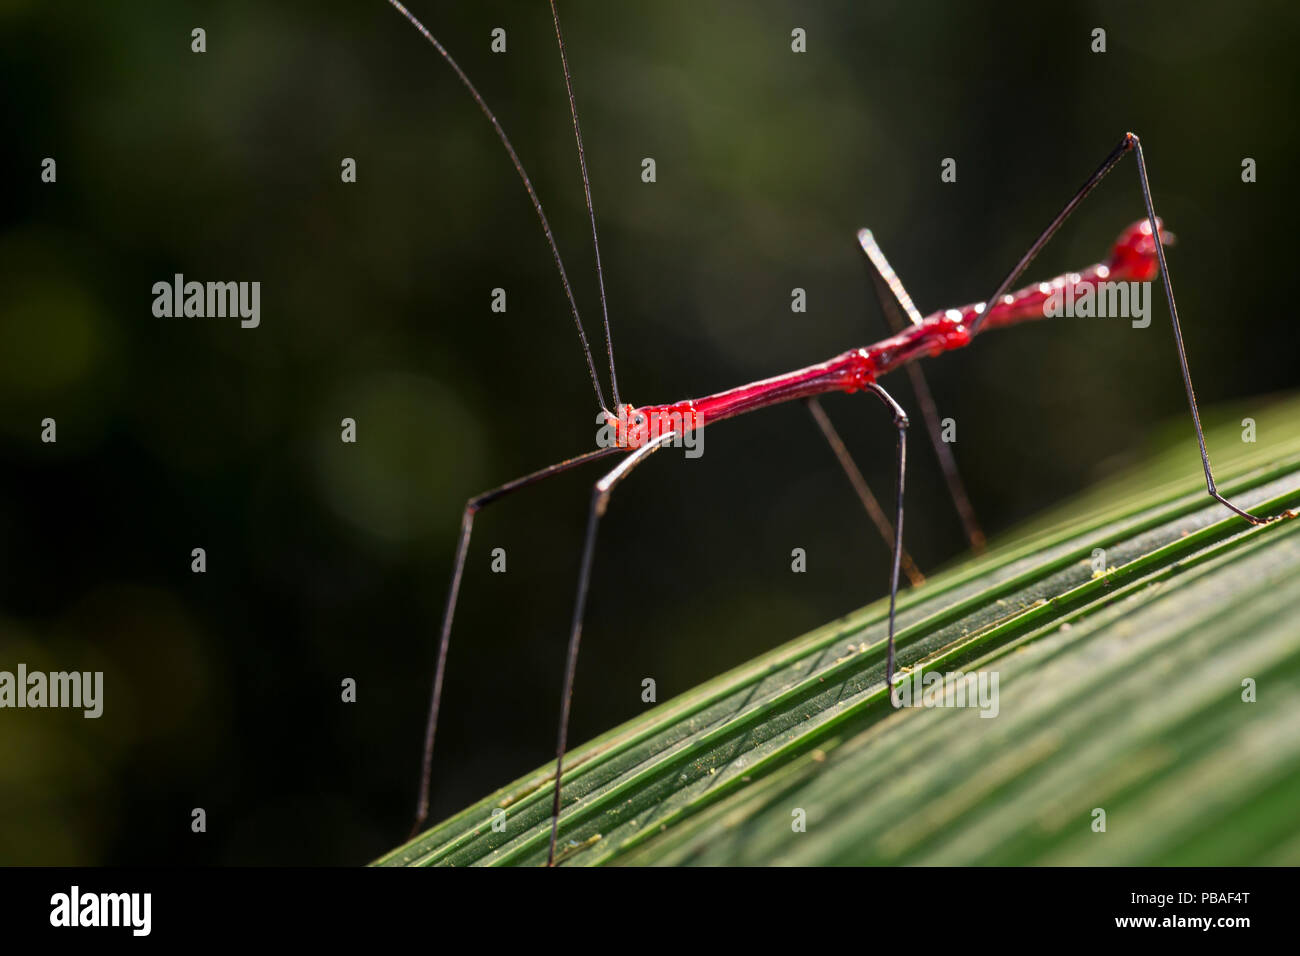 Walking Stick Insect High Resolution Stock Photography and Images - Alamy